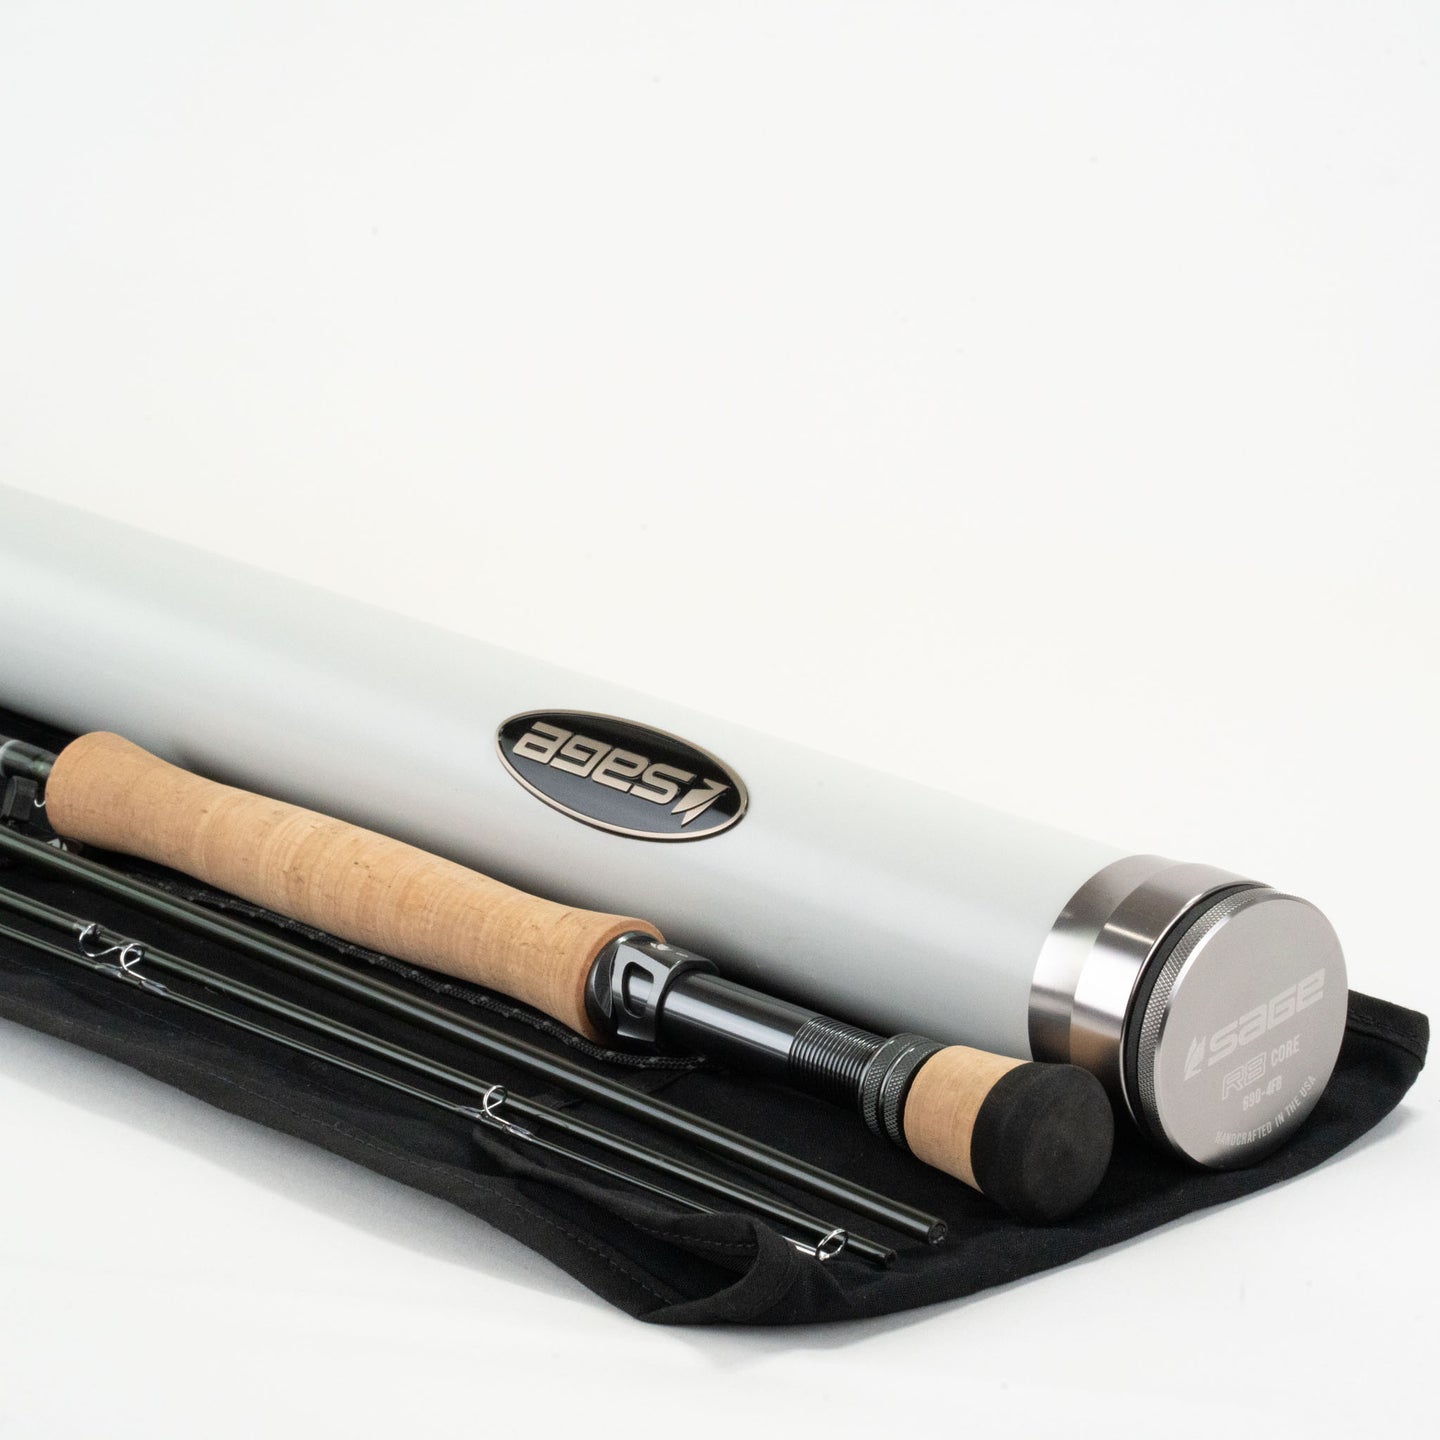 Sage R8 Core FB 690-4 Fly Rod - 6wt 9ft 0in 4pc